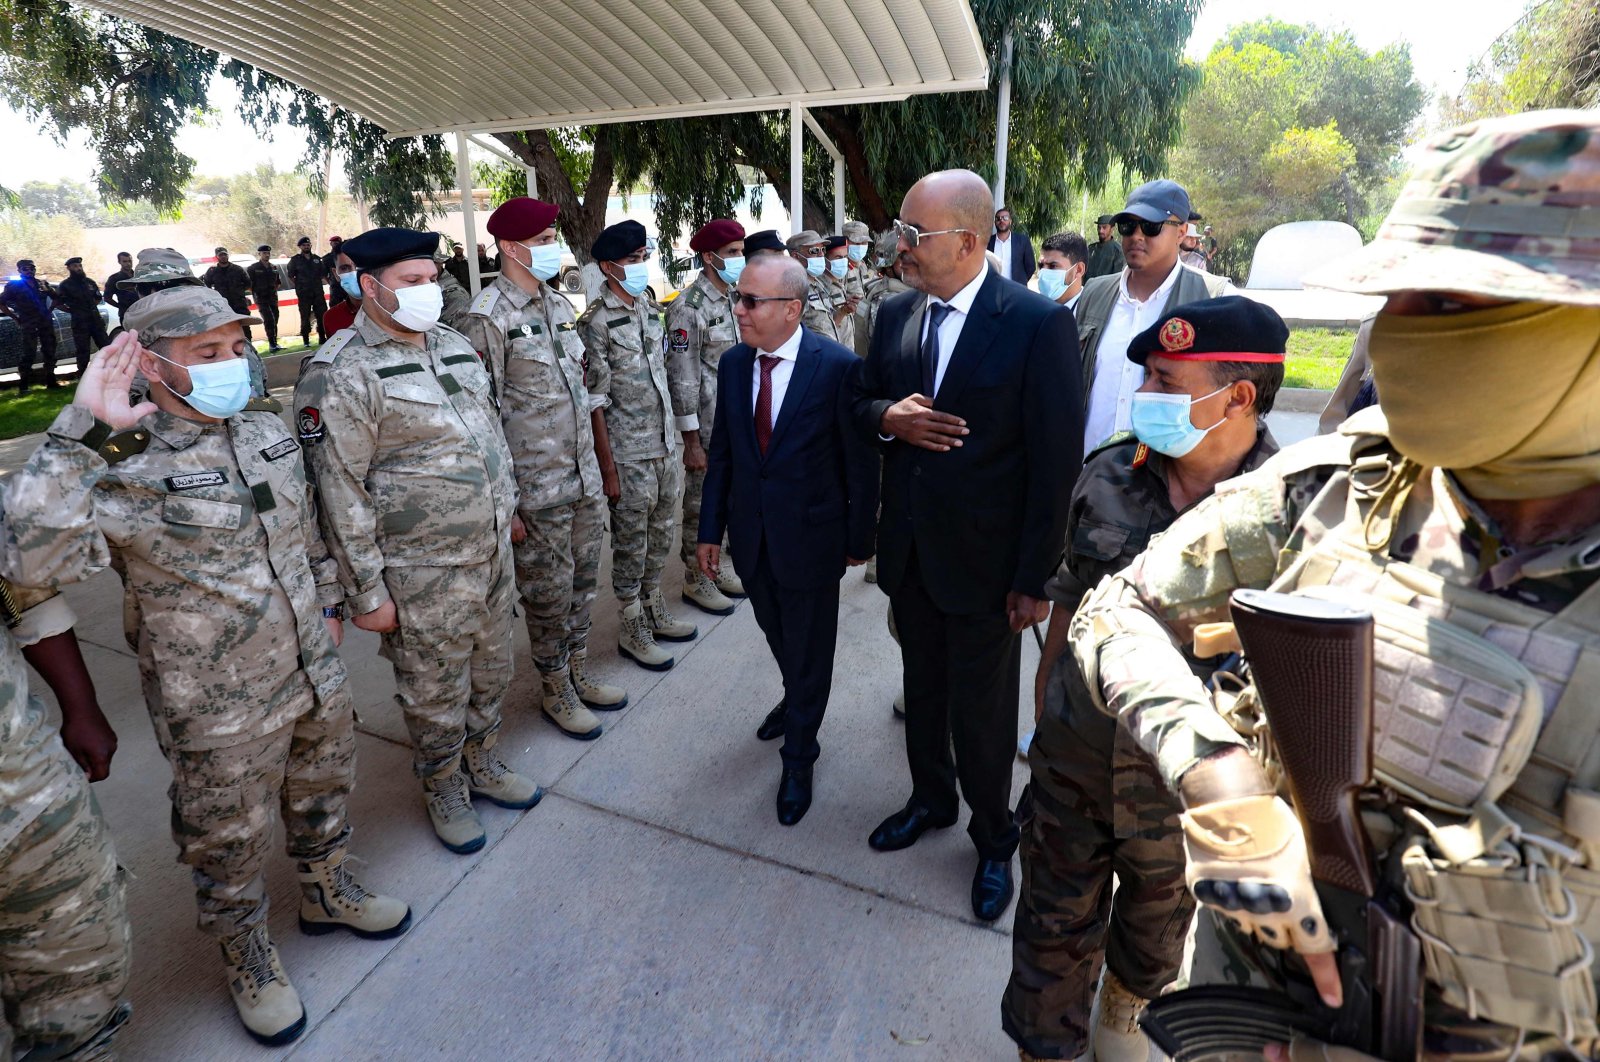 Members of Libya's Presidential Council, Moussa Al-Koni (R) and Abdullah Al-Lafi, visit a camp for Libyan special forces trained by the Turkish military, in the coastal city al-Khums, about 120kms east of the capital Tripoli, on August 15, 2021. (Photo by Mahmud TURKIA / AFP)